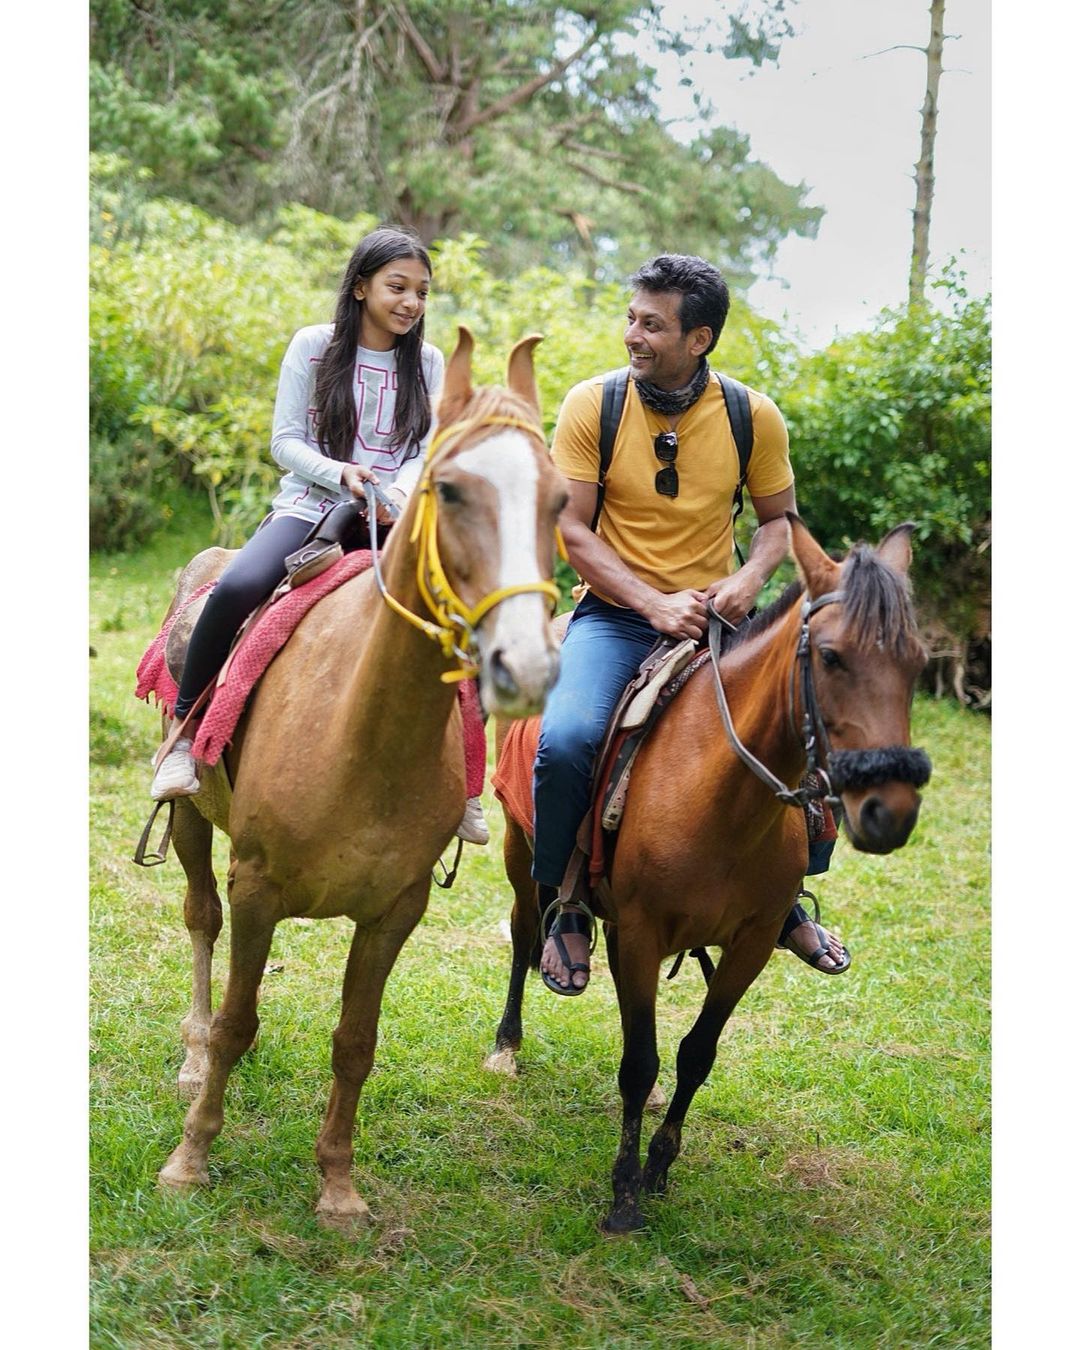 Indraneil Sengupta with daughter in horse riding